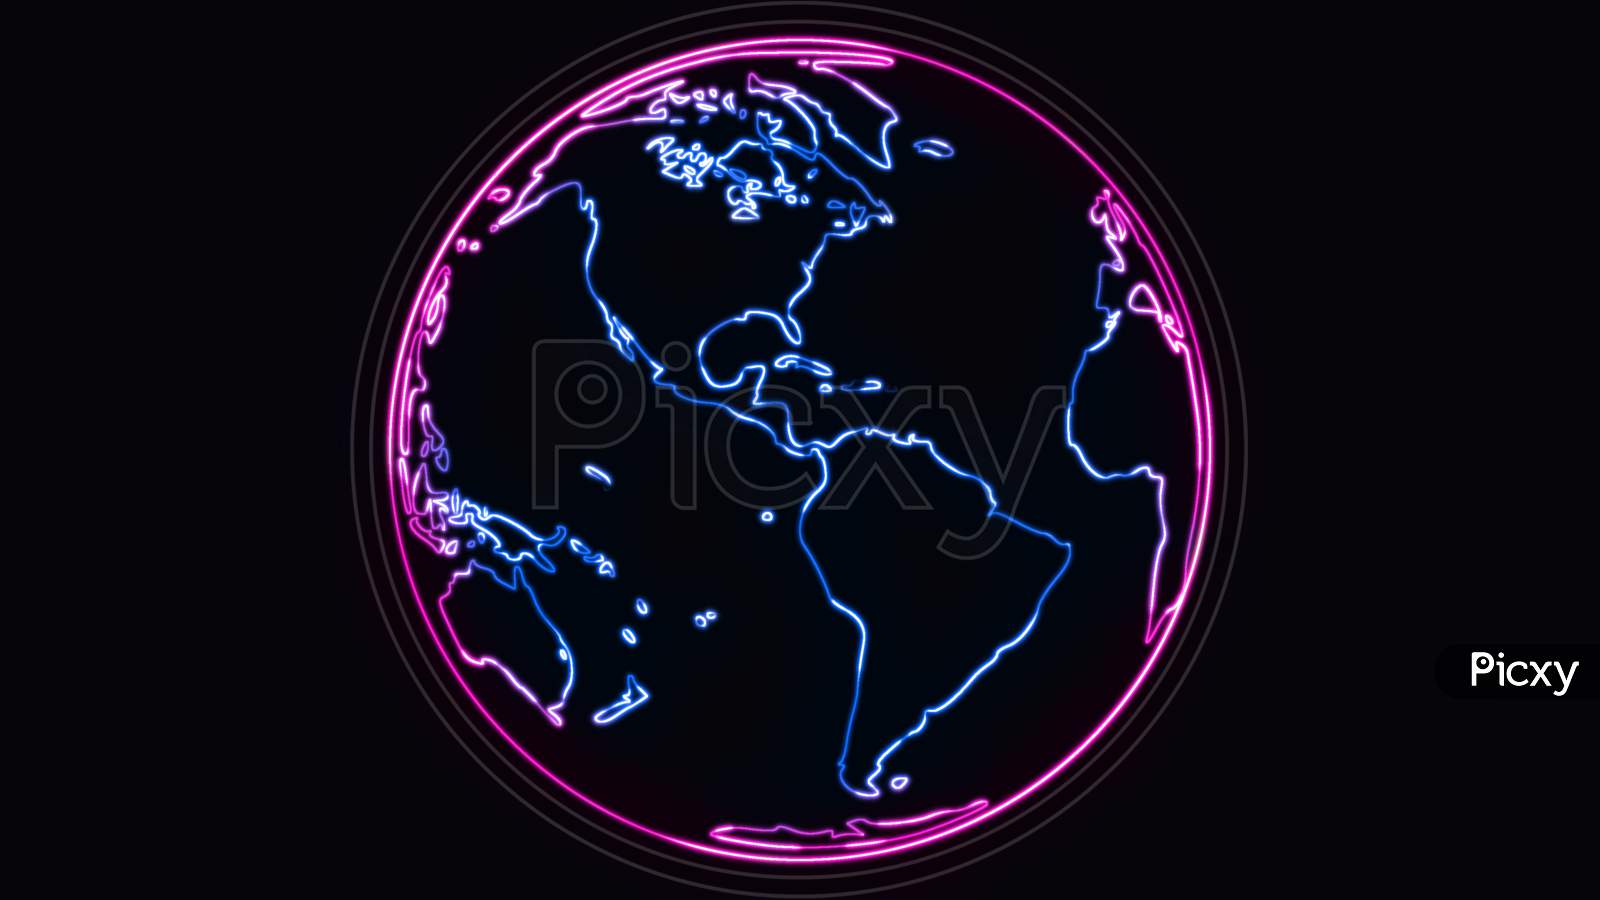 Image Of Vector Graphic Of Glowing Neon Sign Of World Earth In Globe Symbol And Greeting Text At The Center, On Dark Black Background. Earth Neon Banner. TT491958 Picxy